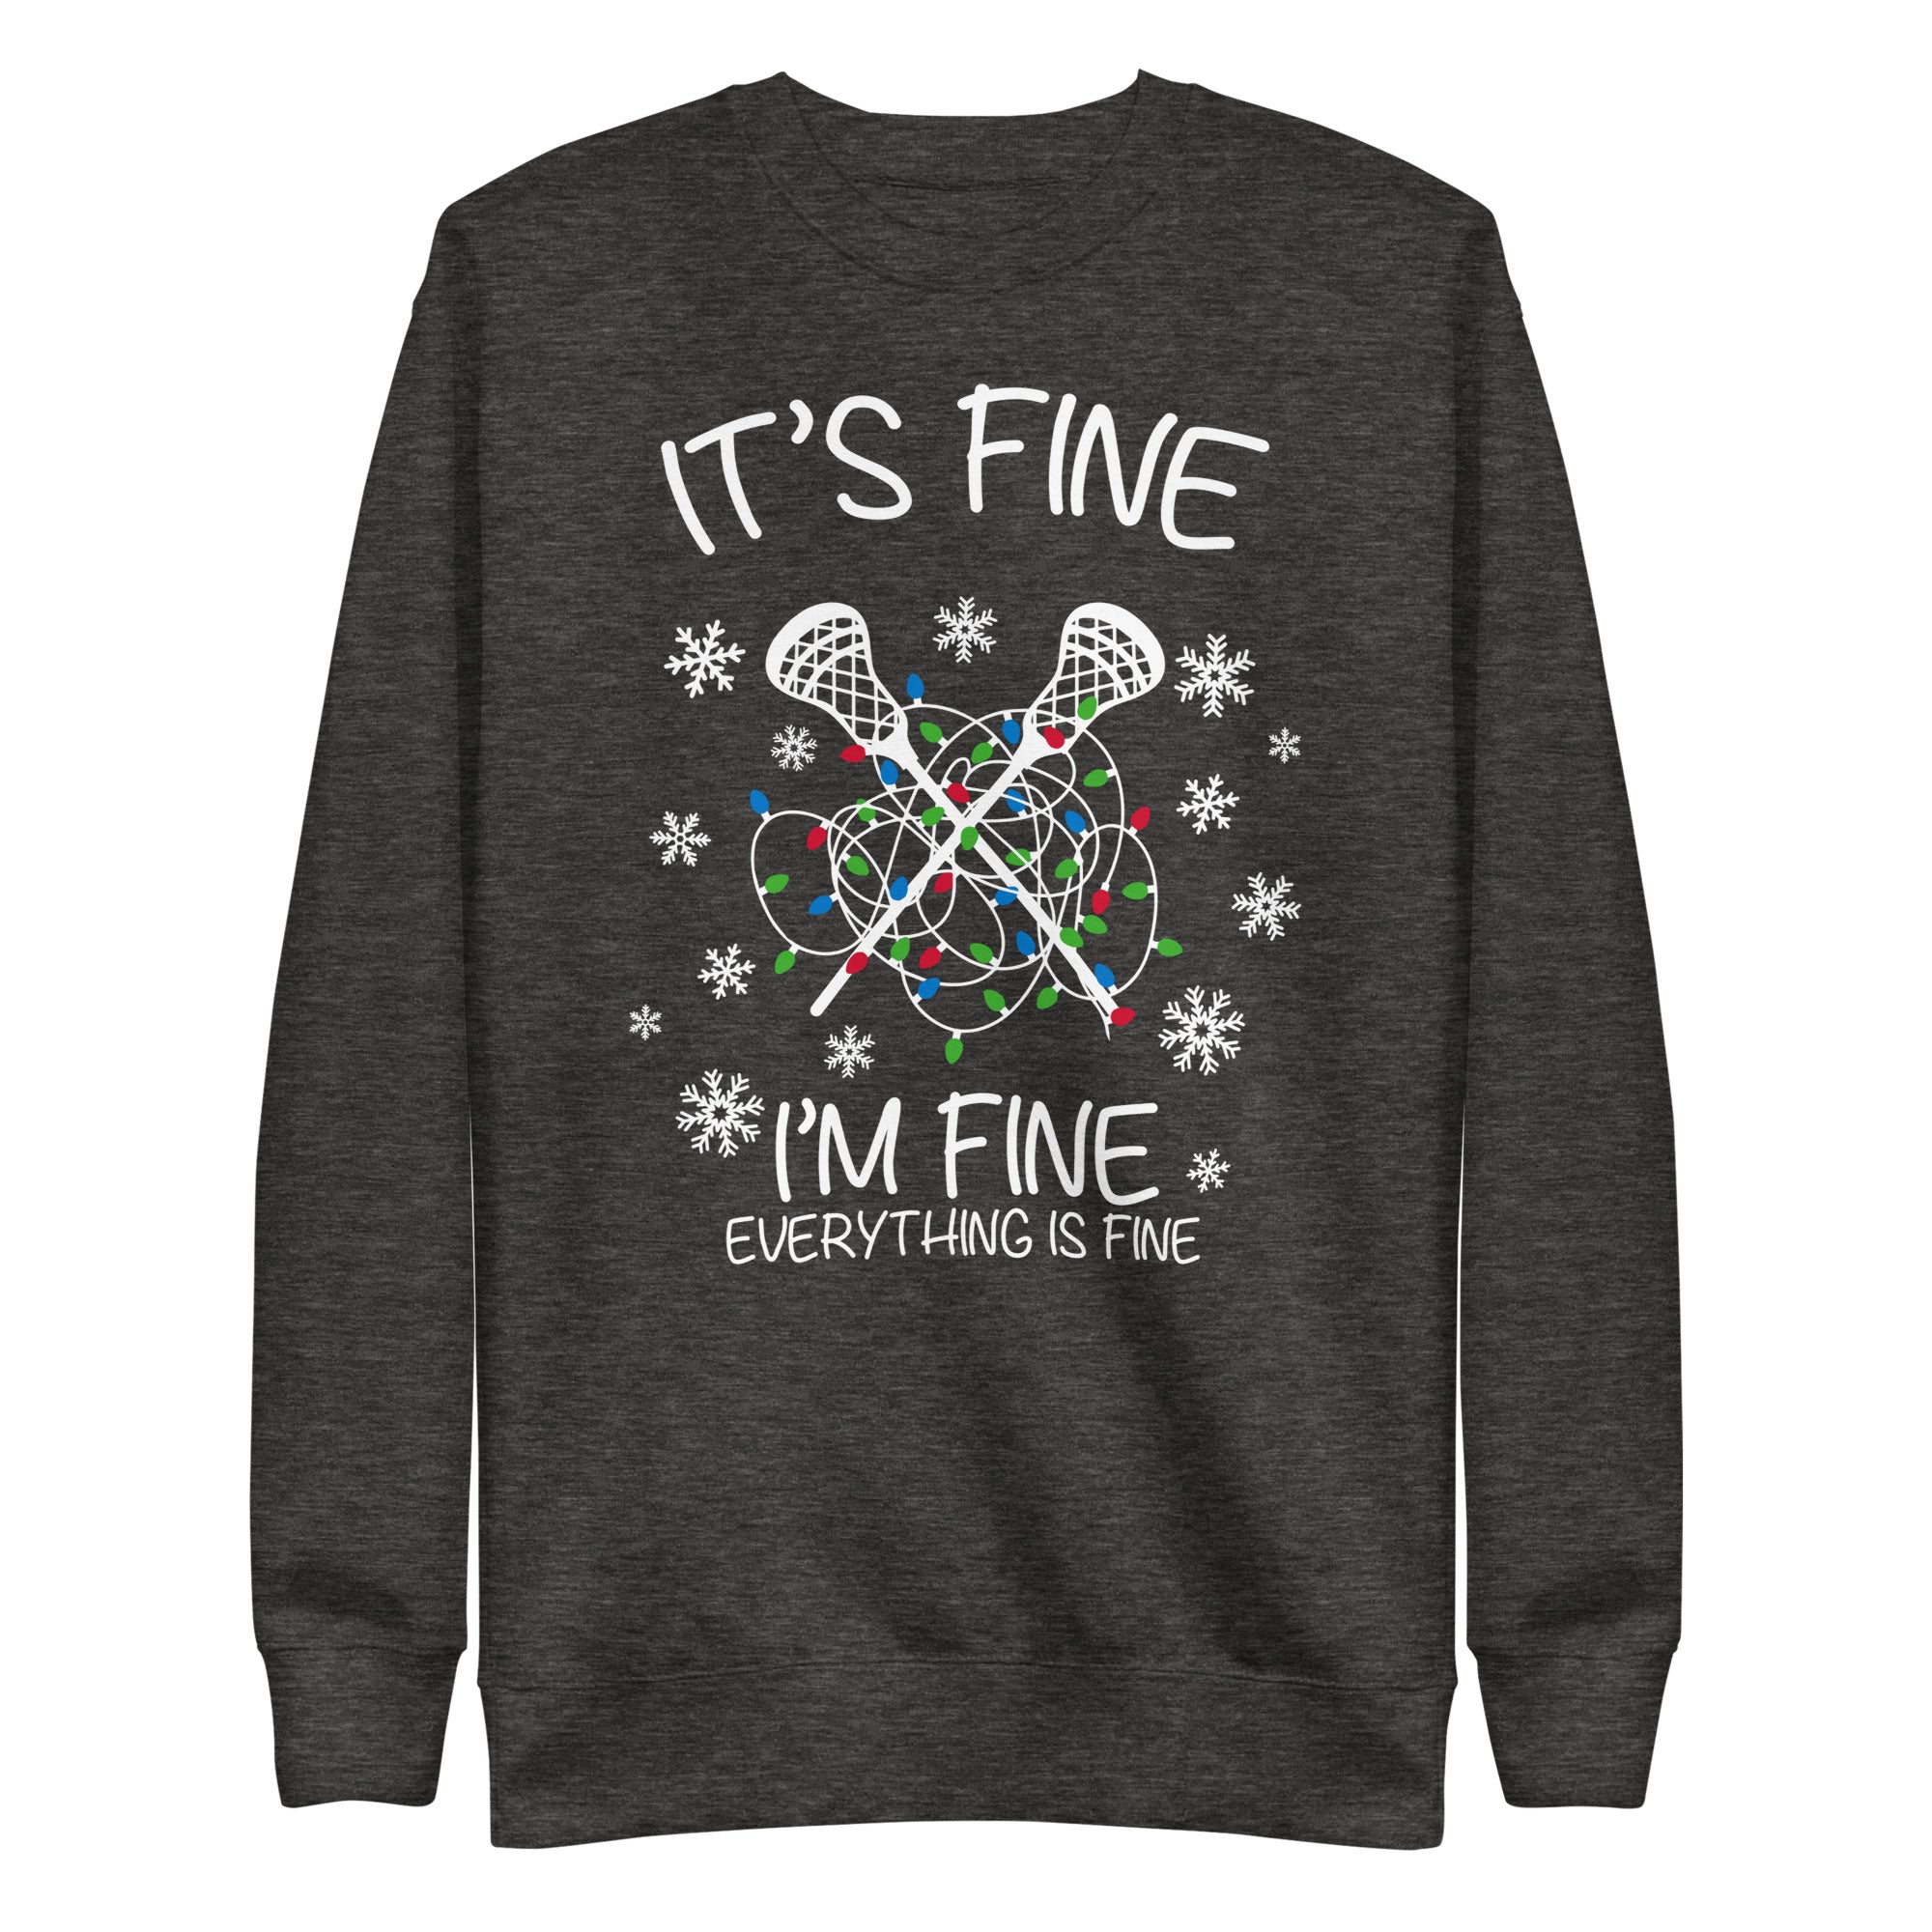 ULC Christmas Sweater - Everything is Fine